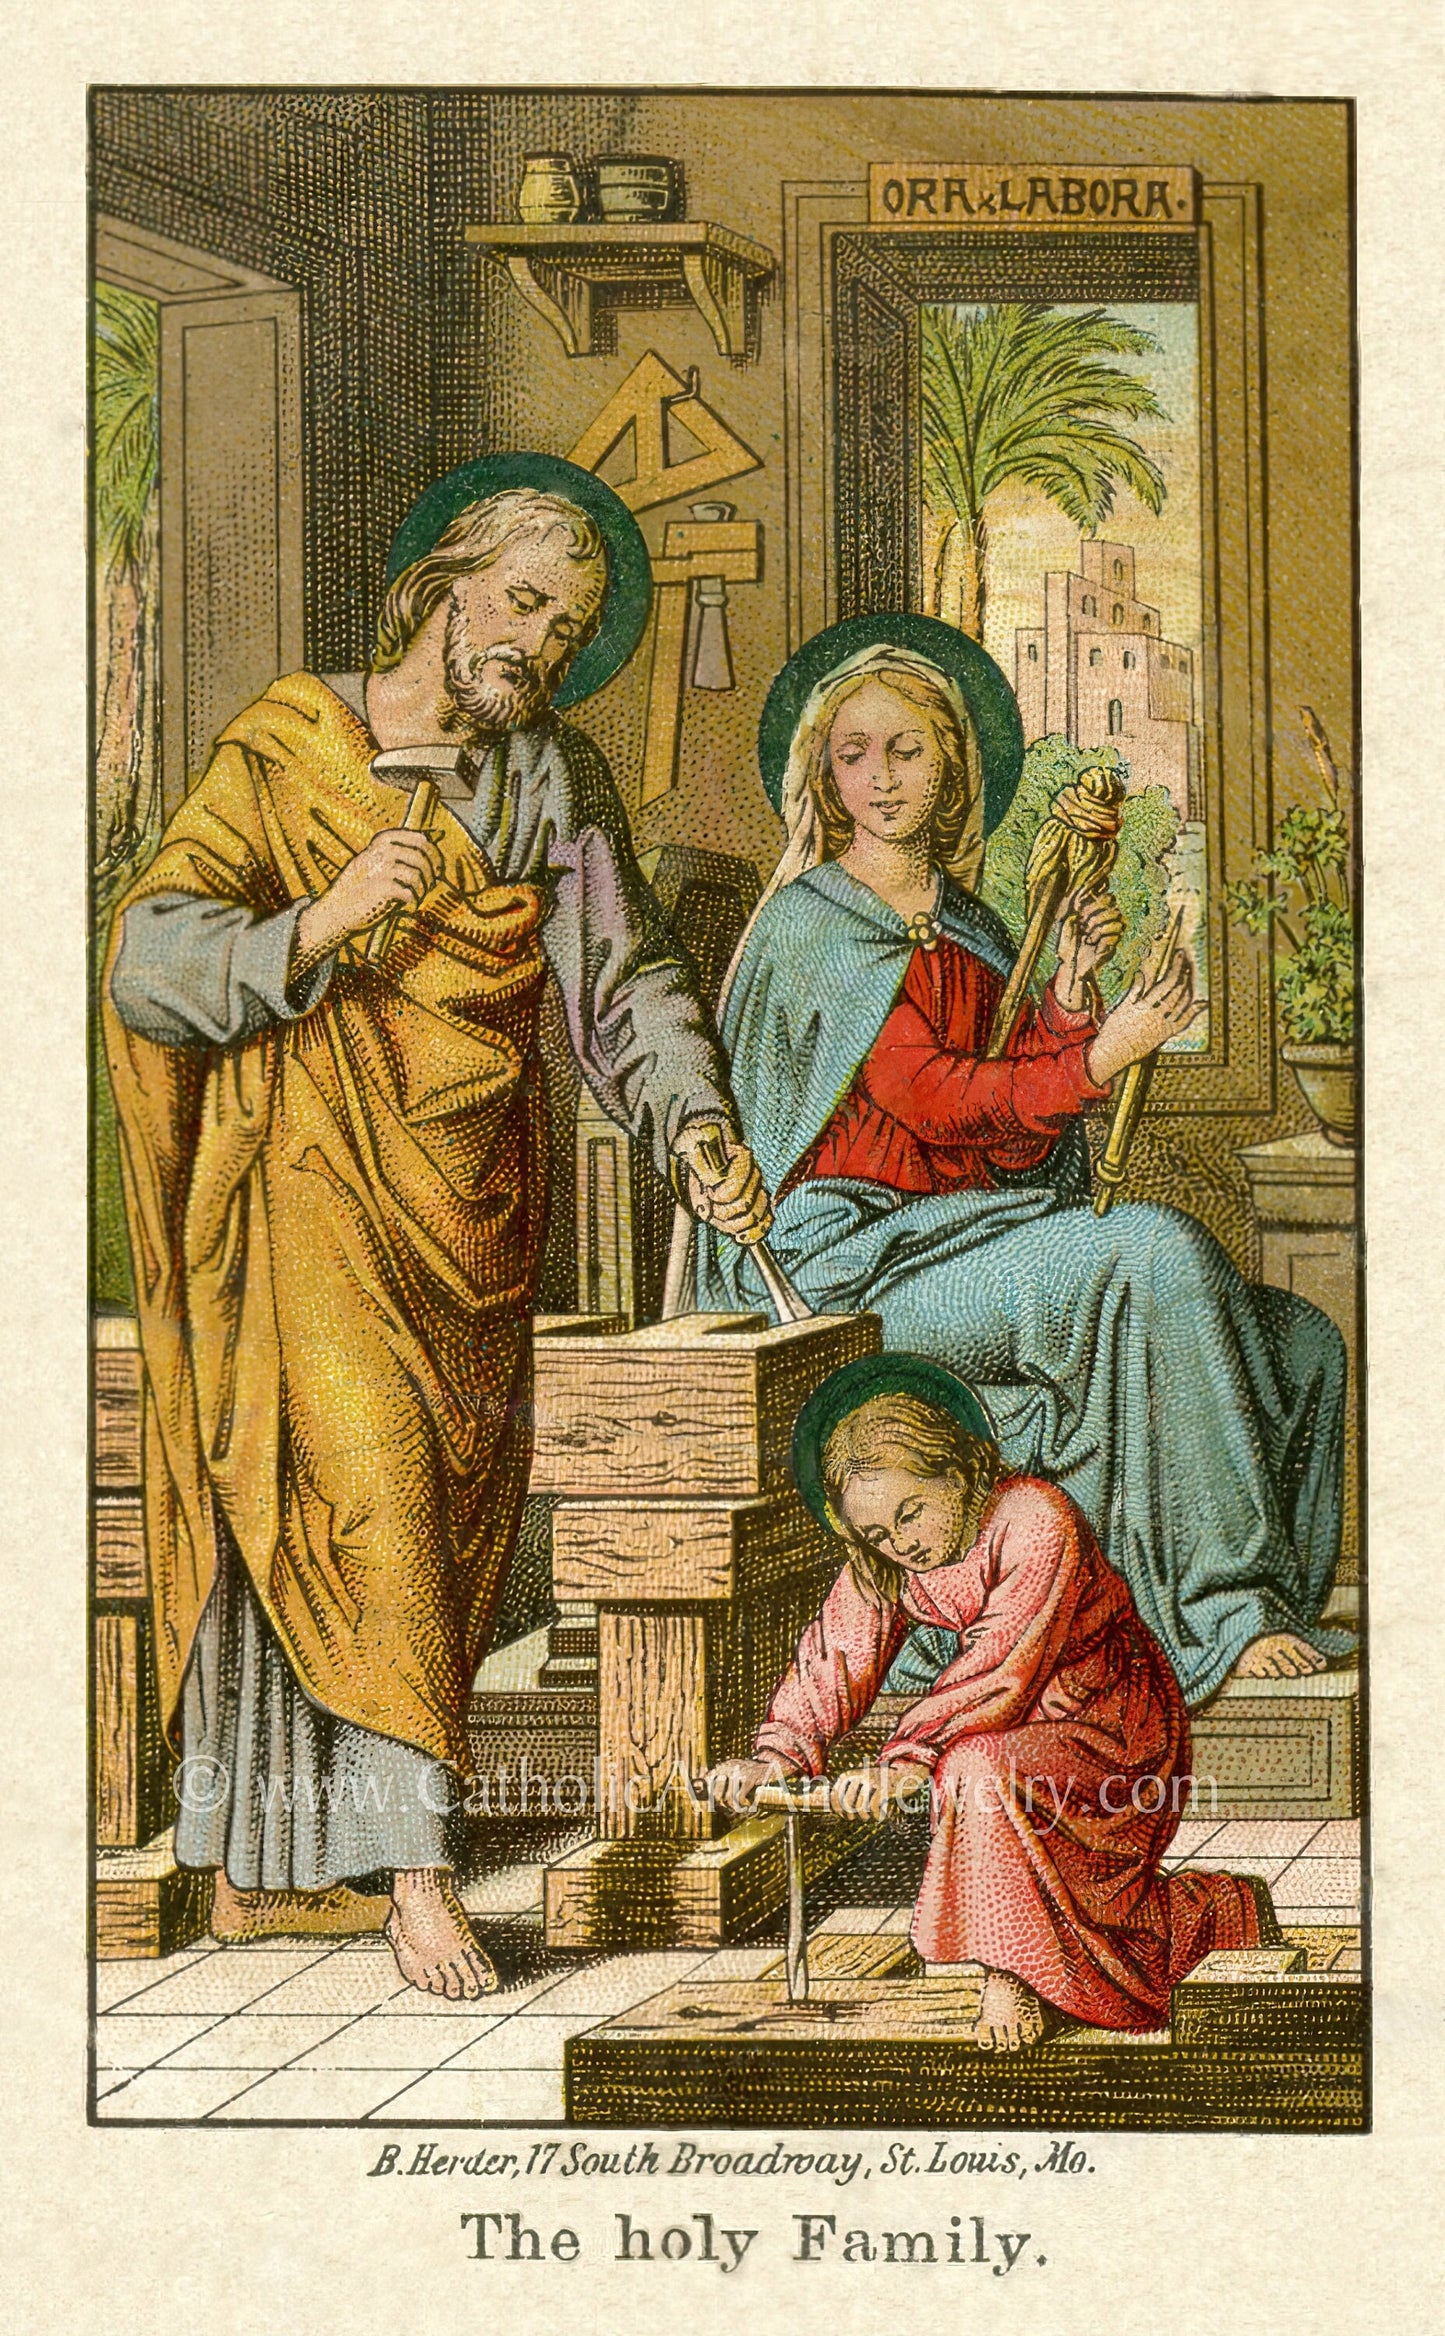 The Holy Family – Ora Et Labora – Based on an Vintage American Holy Card – Catholic Art Print – Archival Quality